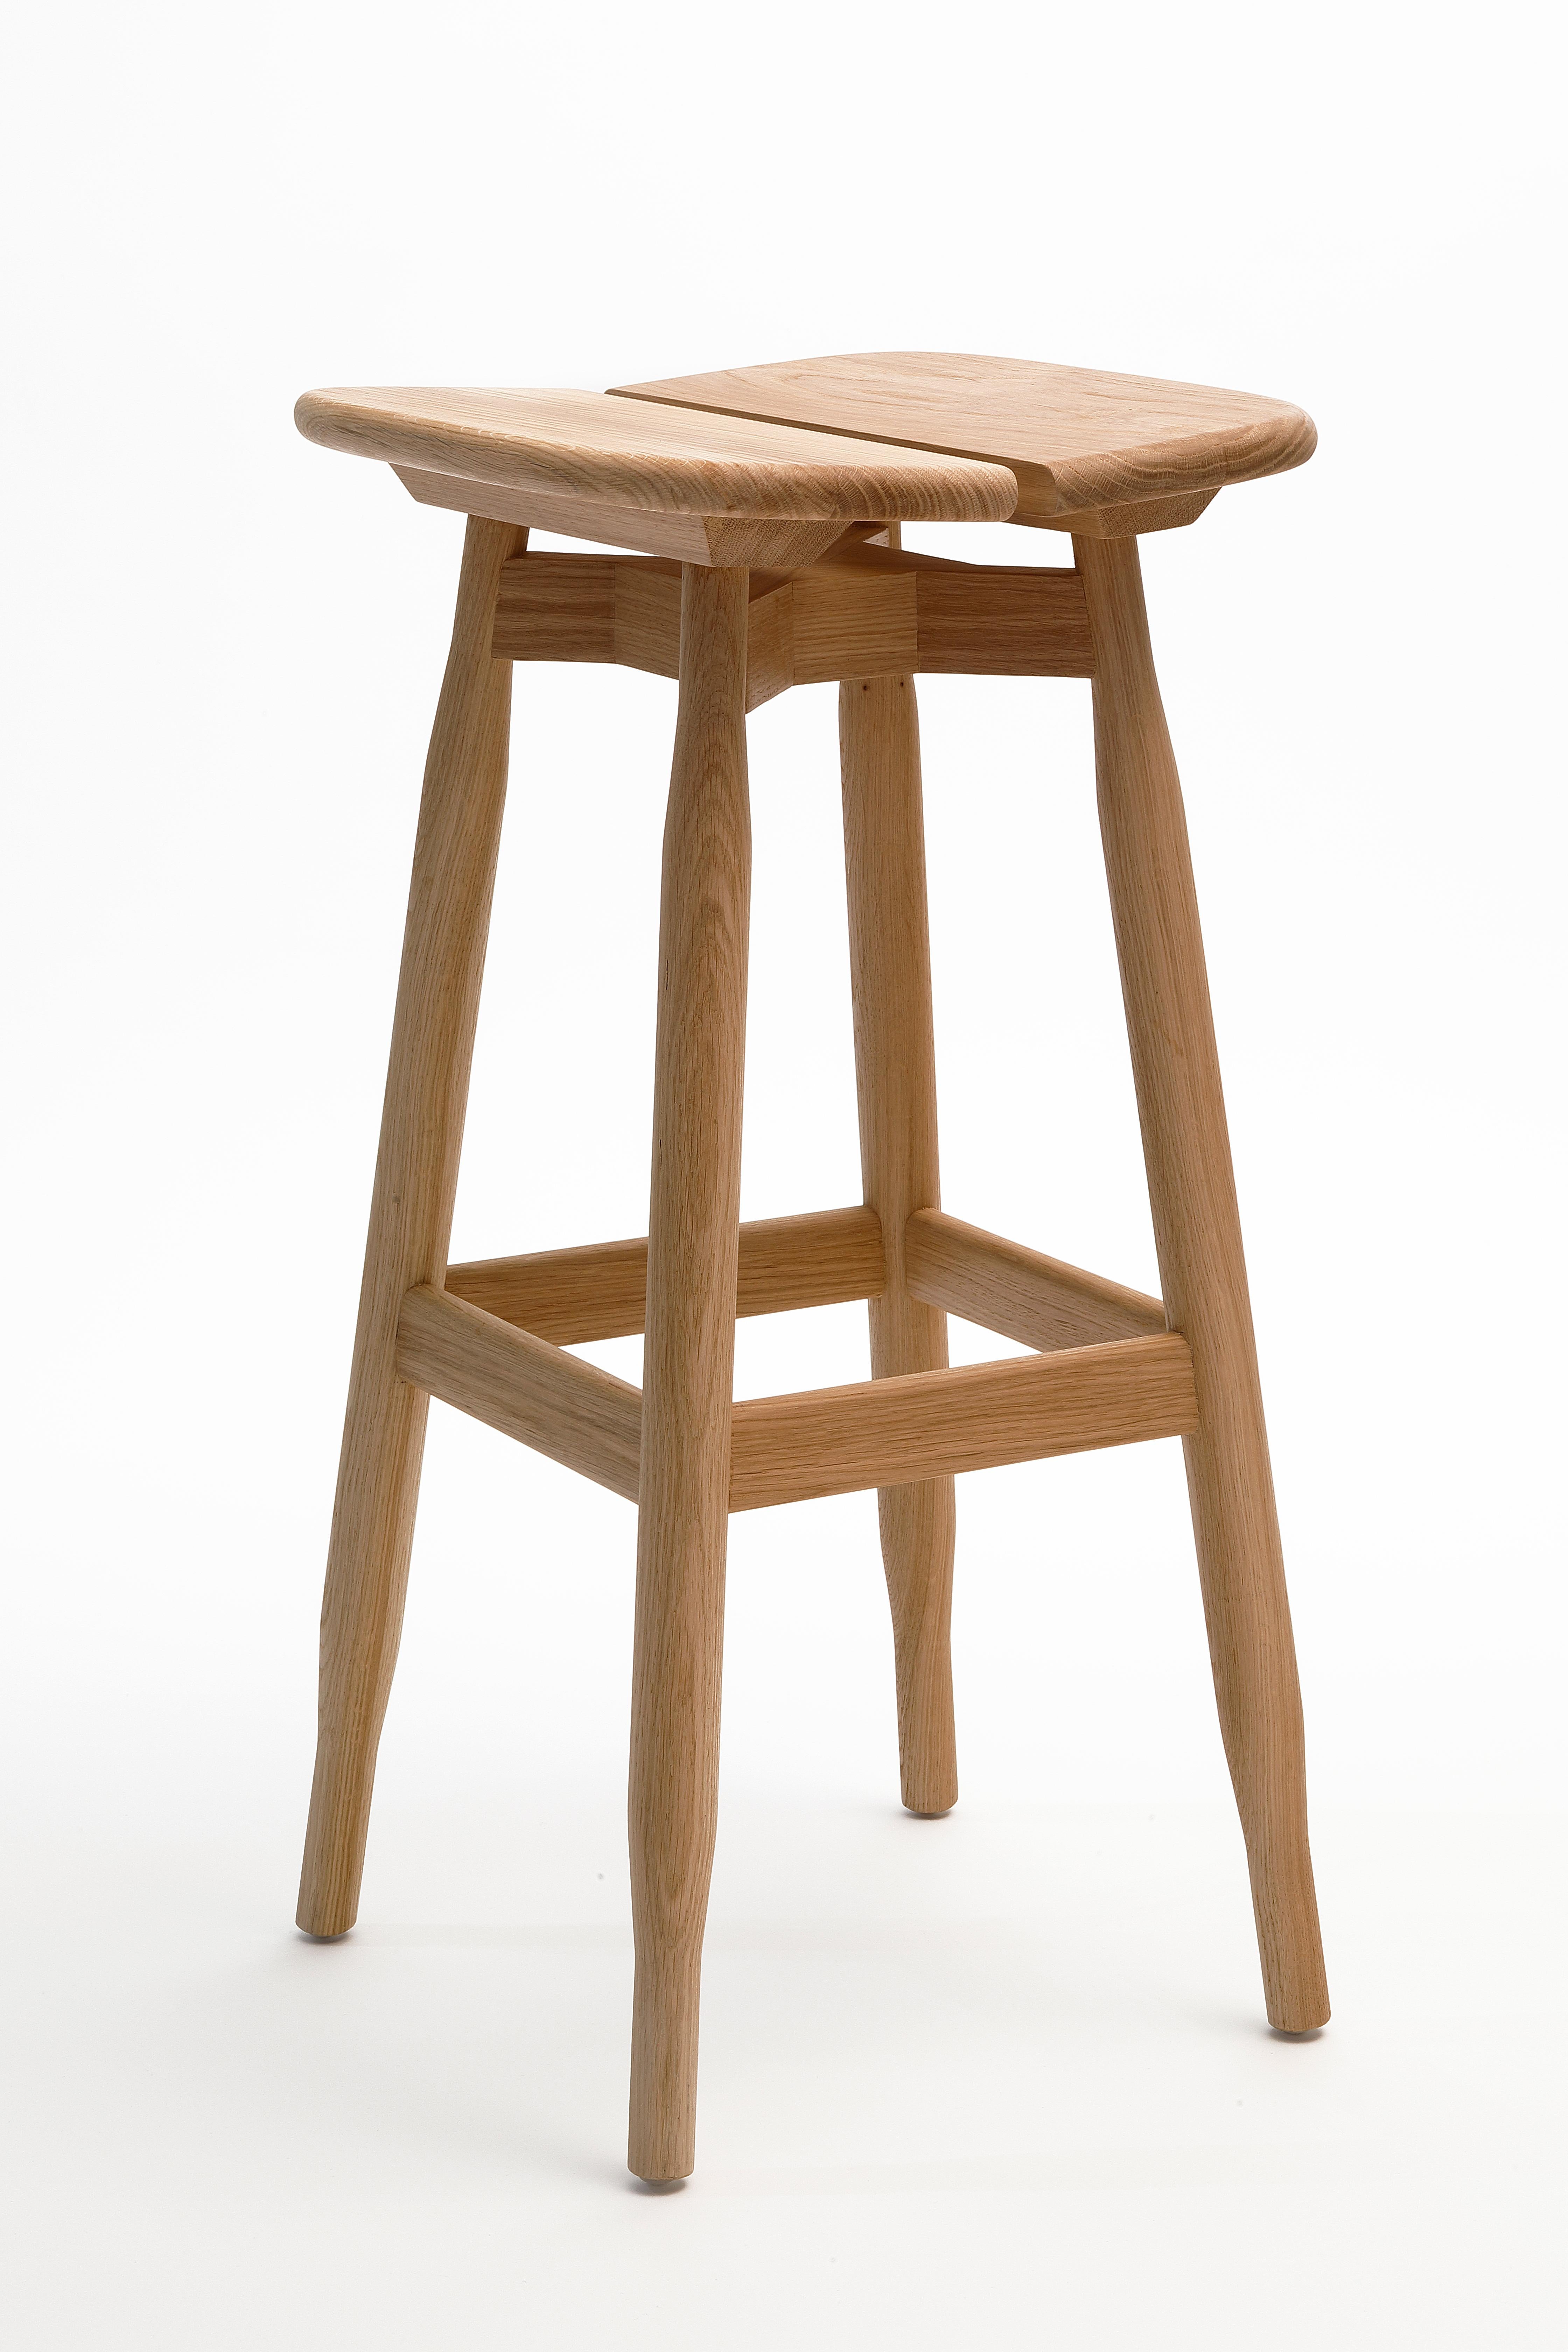 High natural oak DOM stool by Marcos Zanuso Jr
Materials: High stool, structure, and seat in solid oak, natural varnished or black stained.
Technique: Lacquered metal. Natural or stained wood. 
Dimensions: D 38 x W 40 x H 74 cm


Marco Zanuso